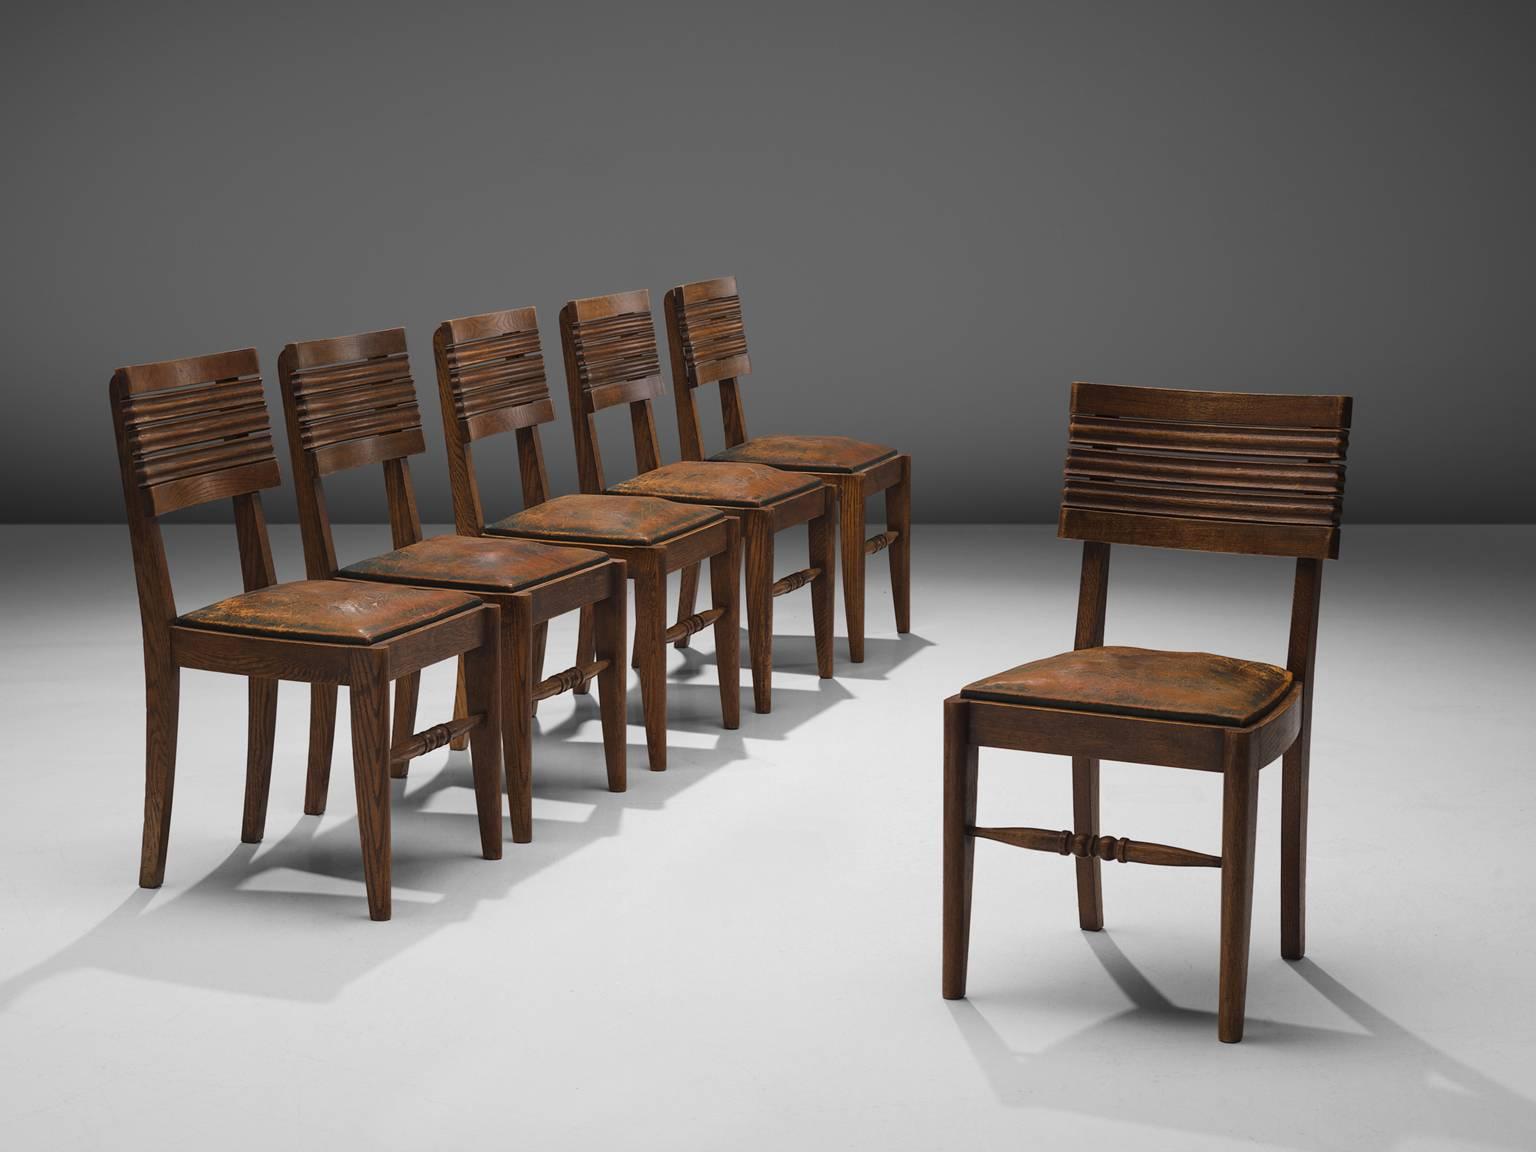 Gaston Poisson, set of six dining chairs, oak and green and brown leather, France 1940s.

Dining chairs in solid oak, with beautiful detailed woodcarving and stunning patinated leather. The back of the chair consist of five slightly curved slats: